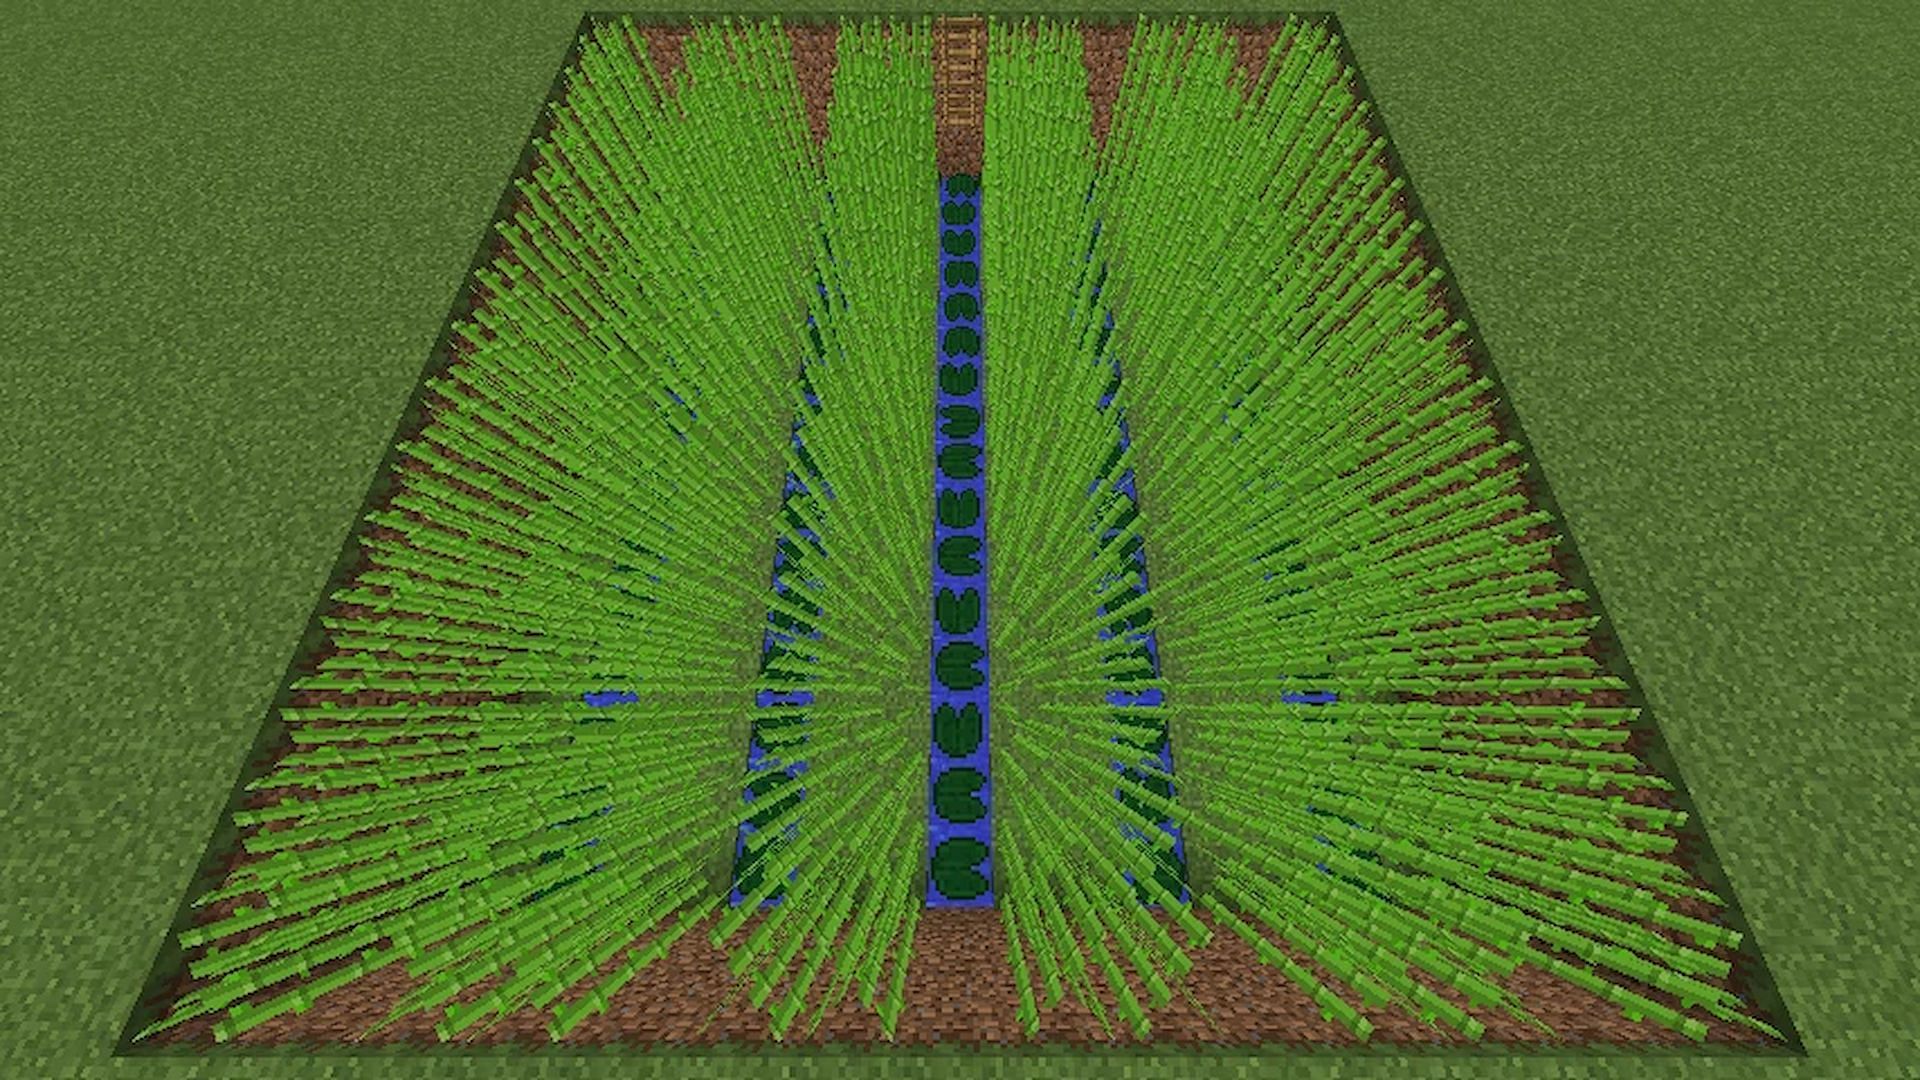 Players can create a very efficient farm using lines of sugar cane and water (Image via minecraft.fandom.com)